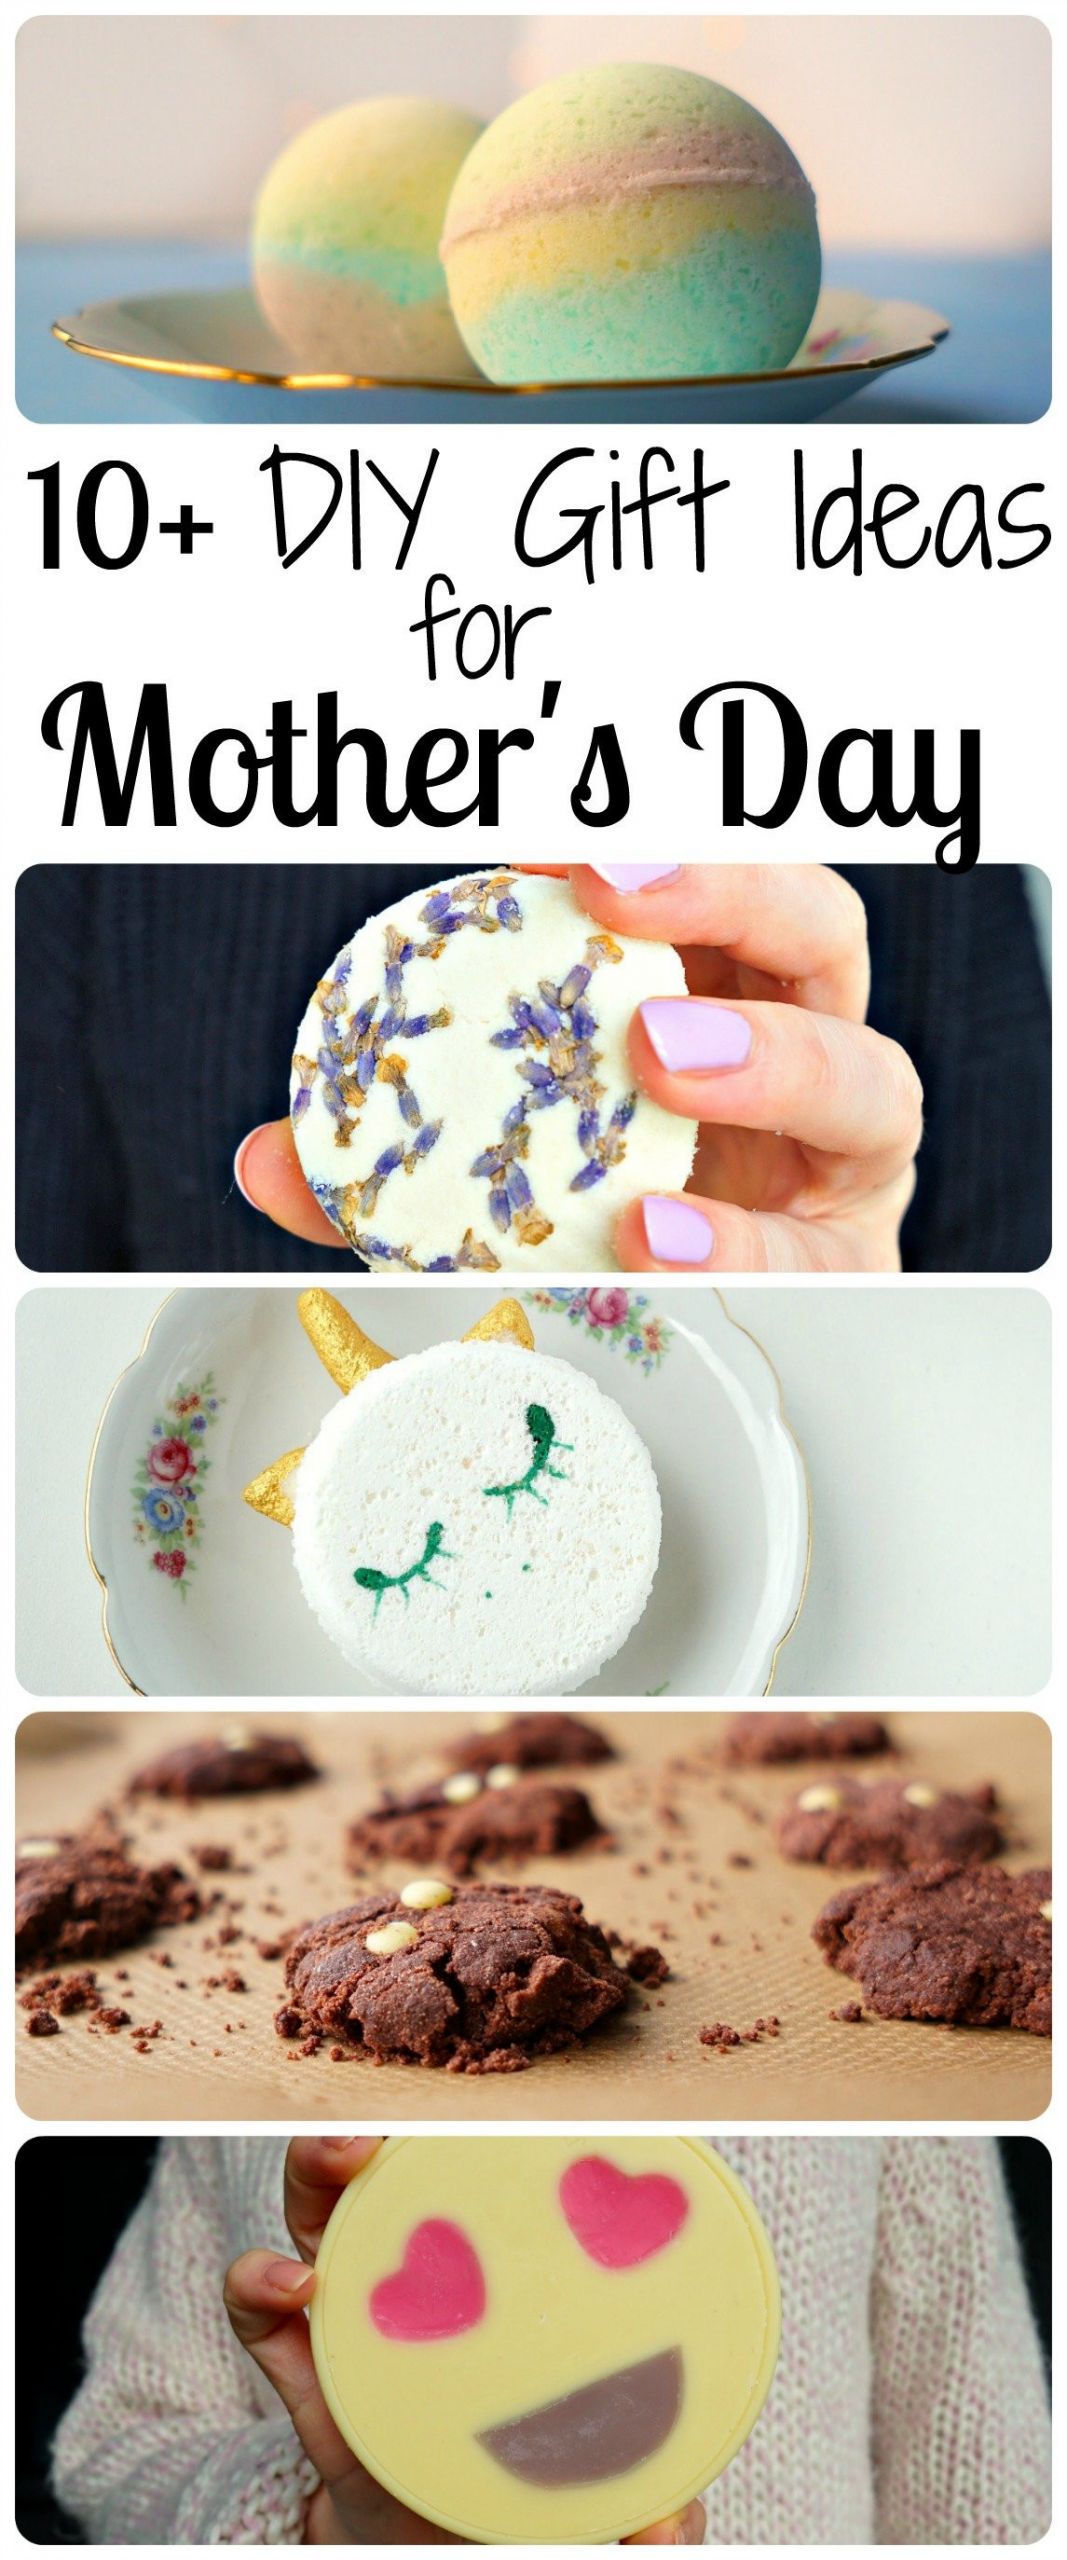 Easy Diy Mother'S Day Gift Ideas
 30 Gift Ideas for Mother s Day to Buy or DIY The Makeup